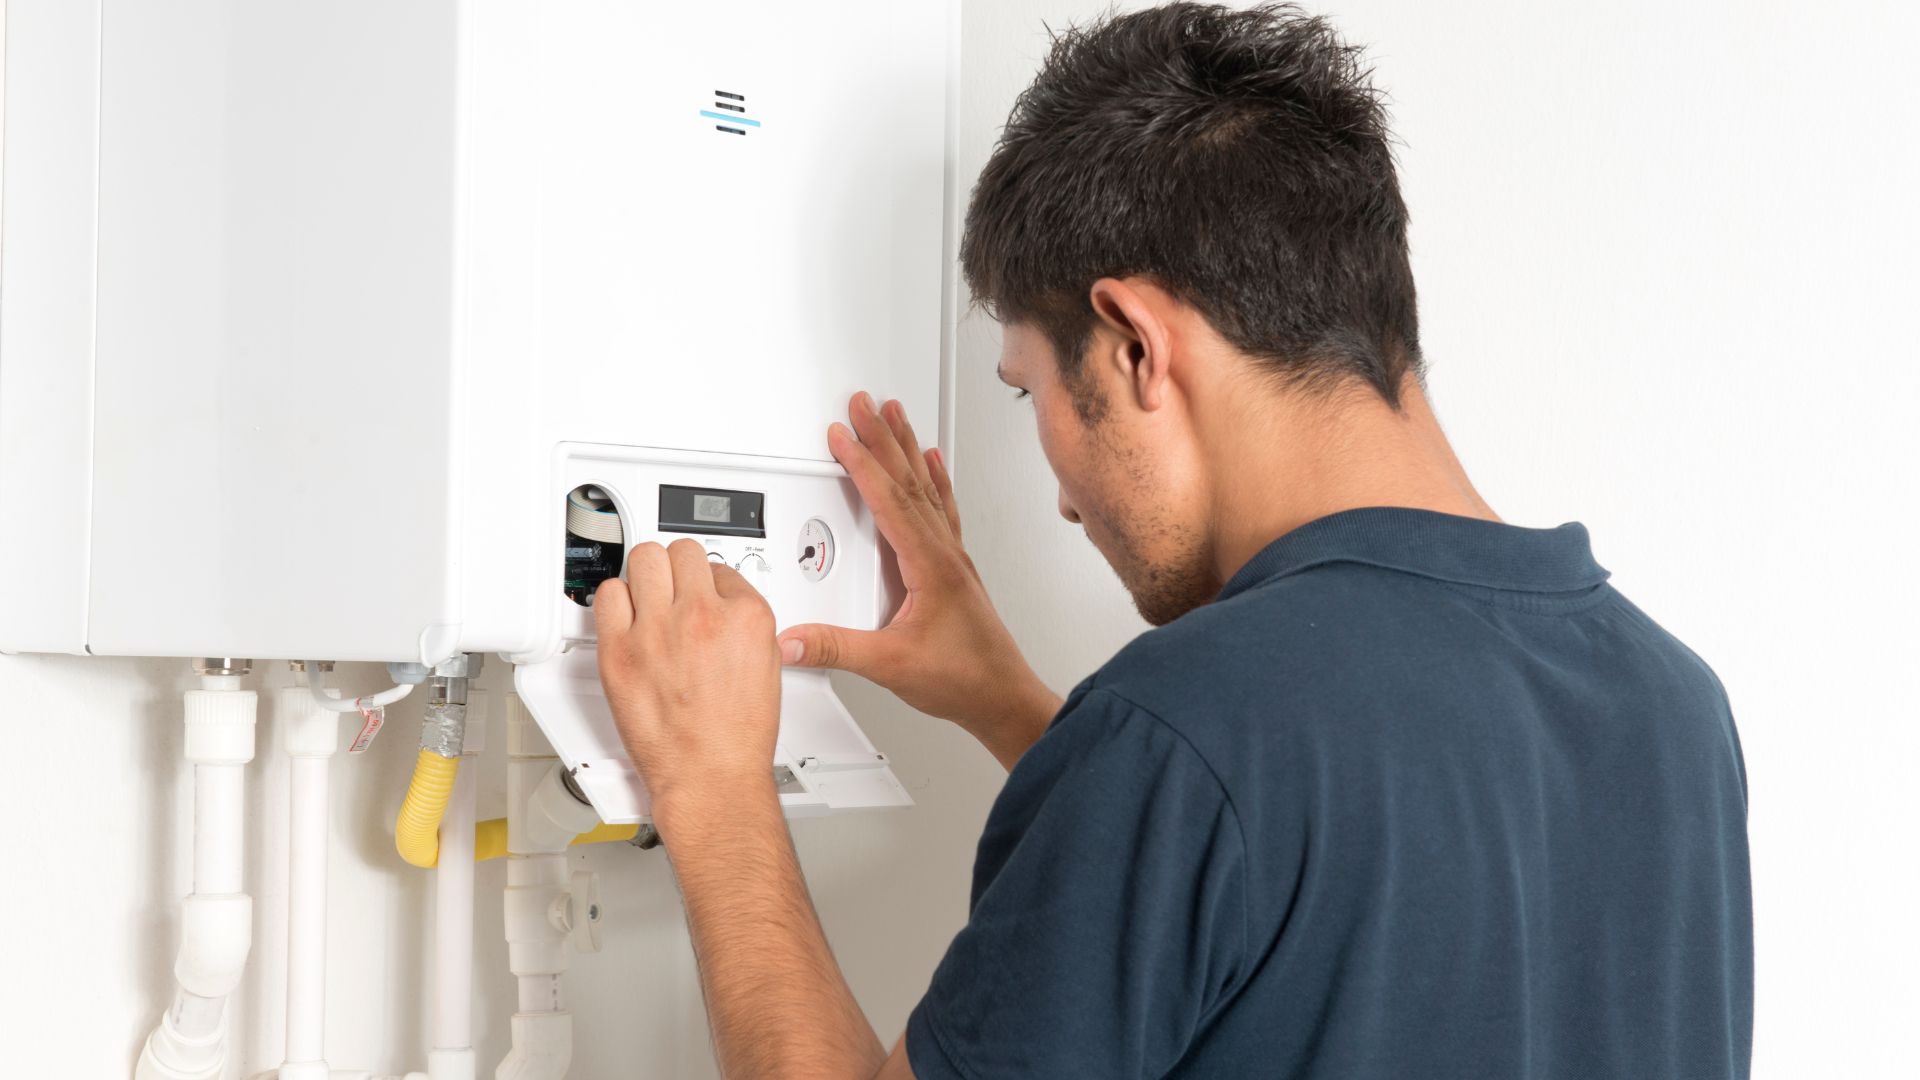 Contact CAN Plumbing and Drainage for all your Boiler Needs – Expert Plumbers Ready to Help